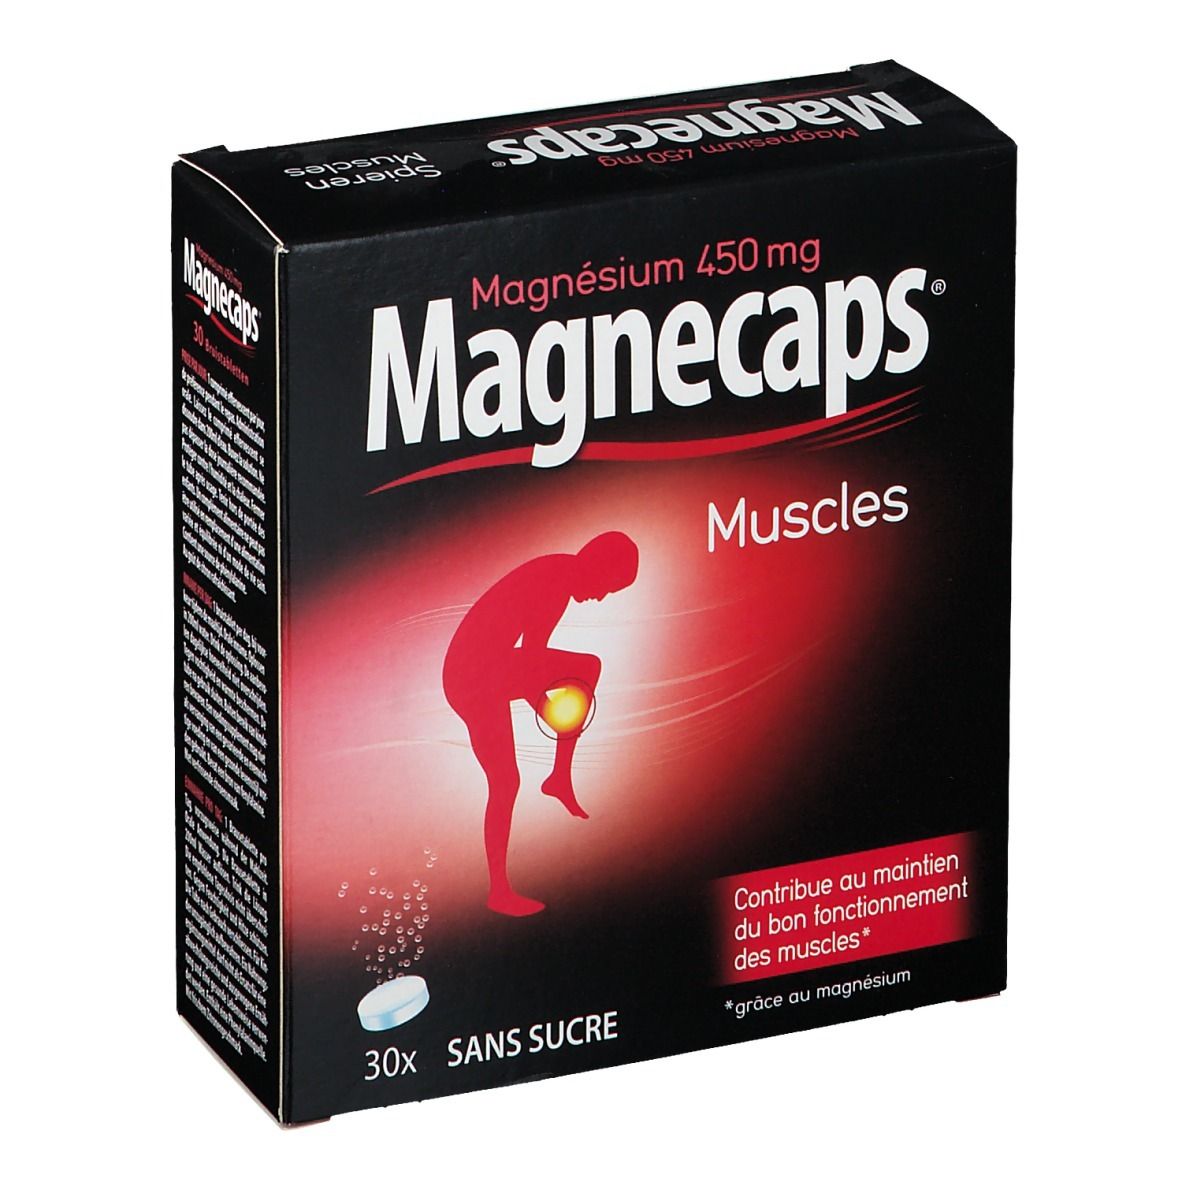 Magnecaps® Muscles